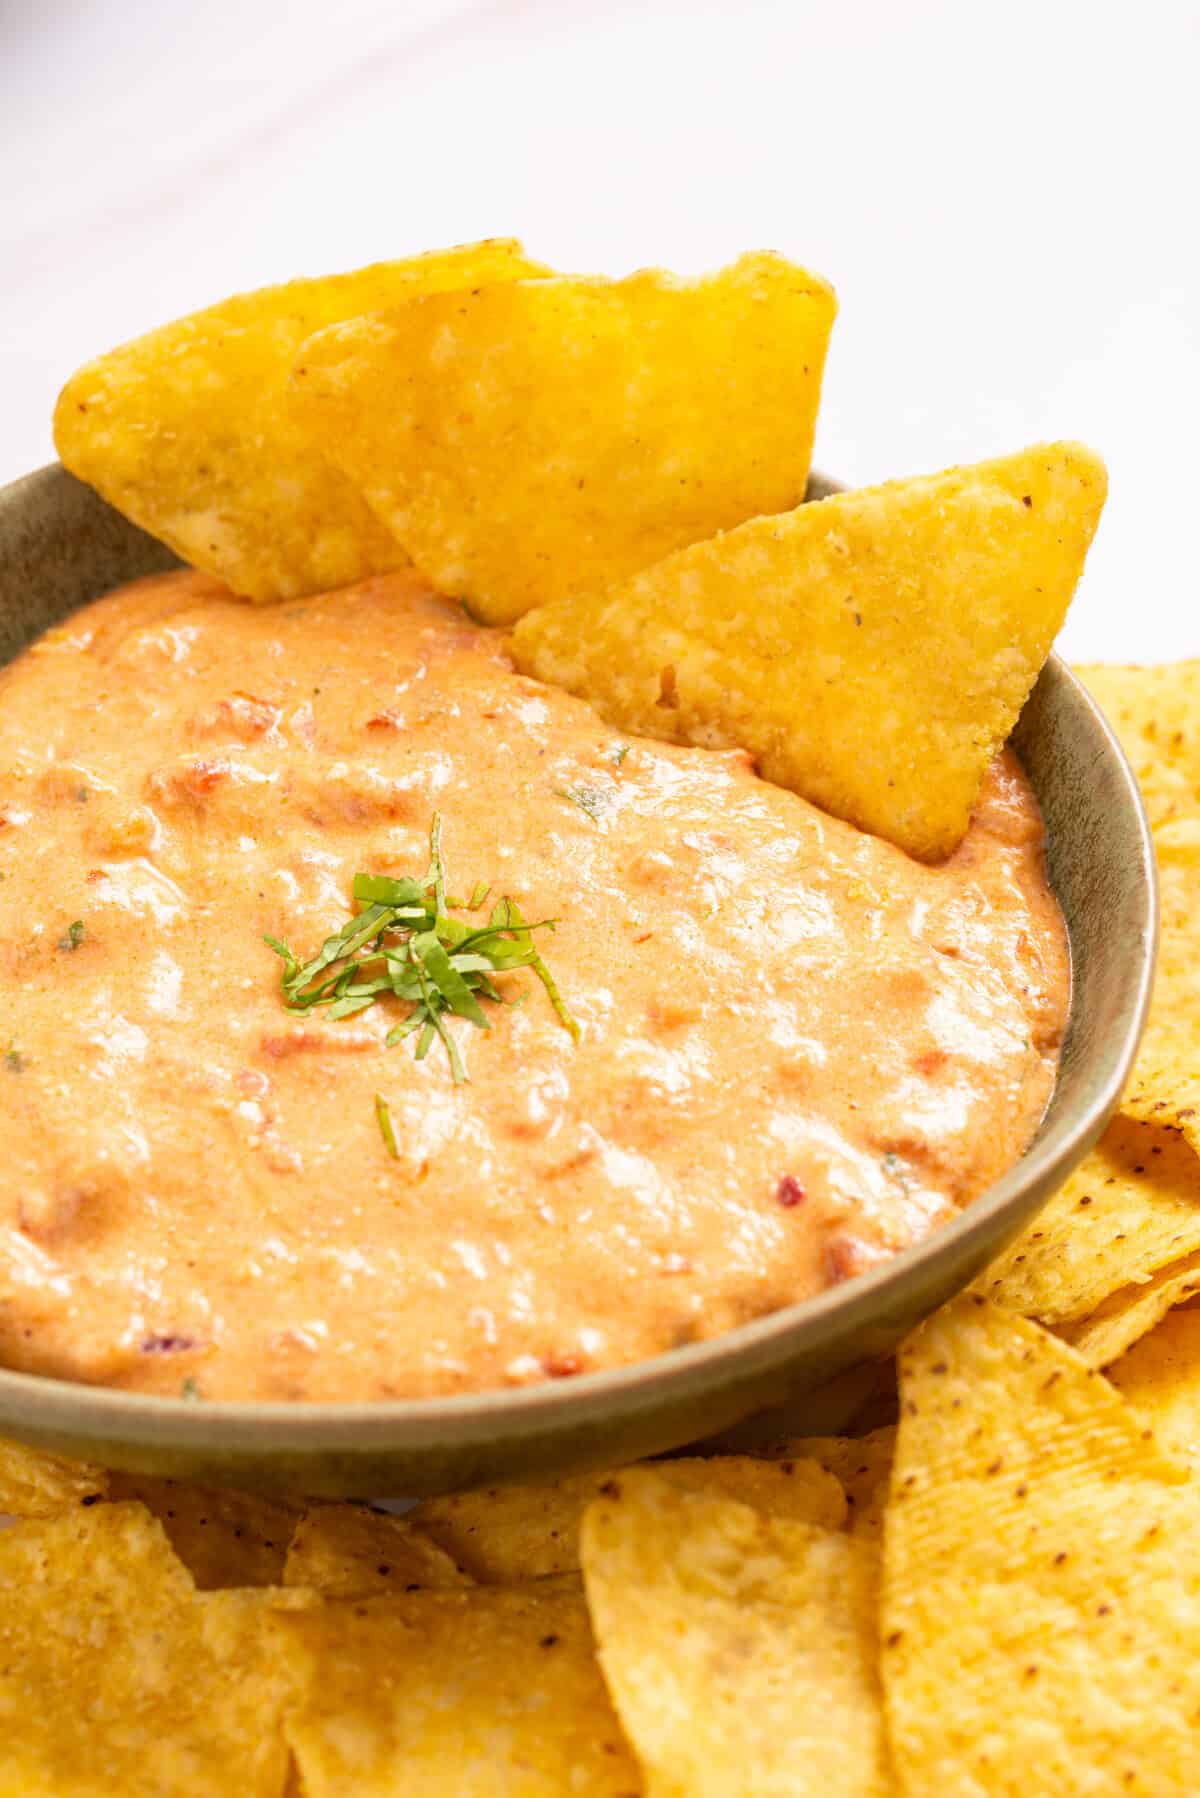 An image of queso in a bowl with nacho chips on the side.